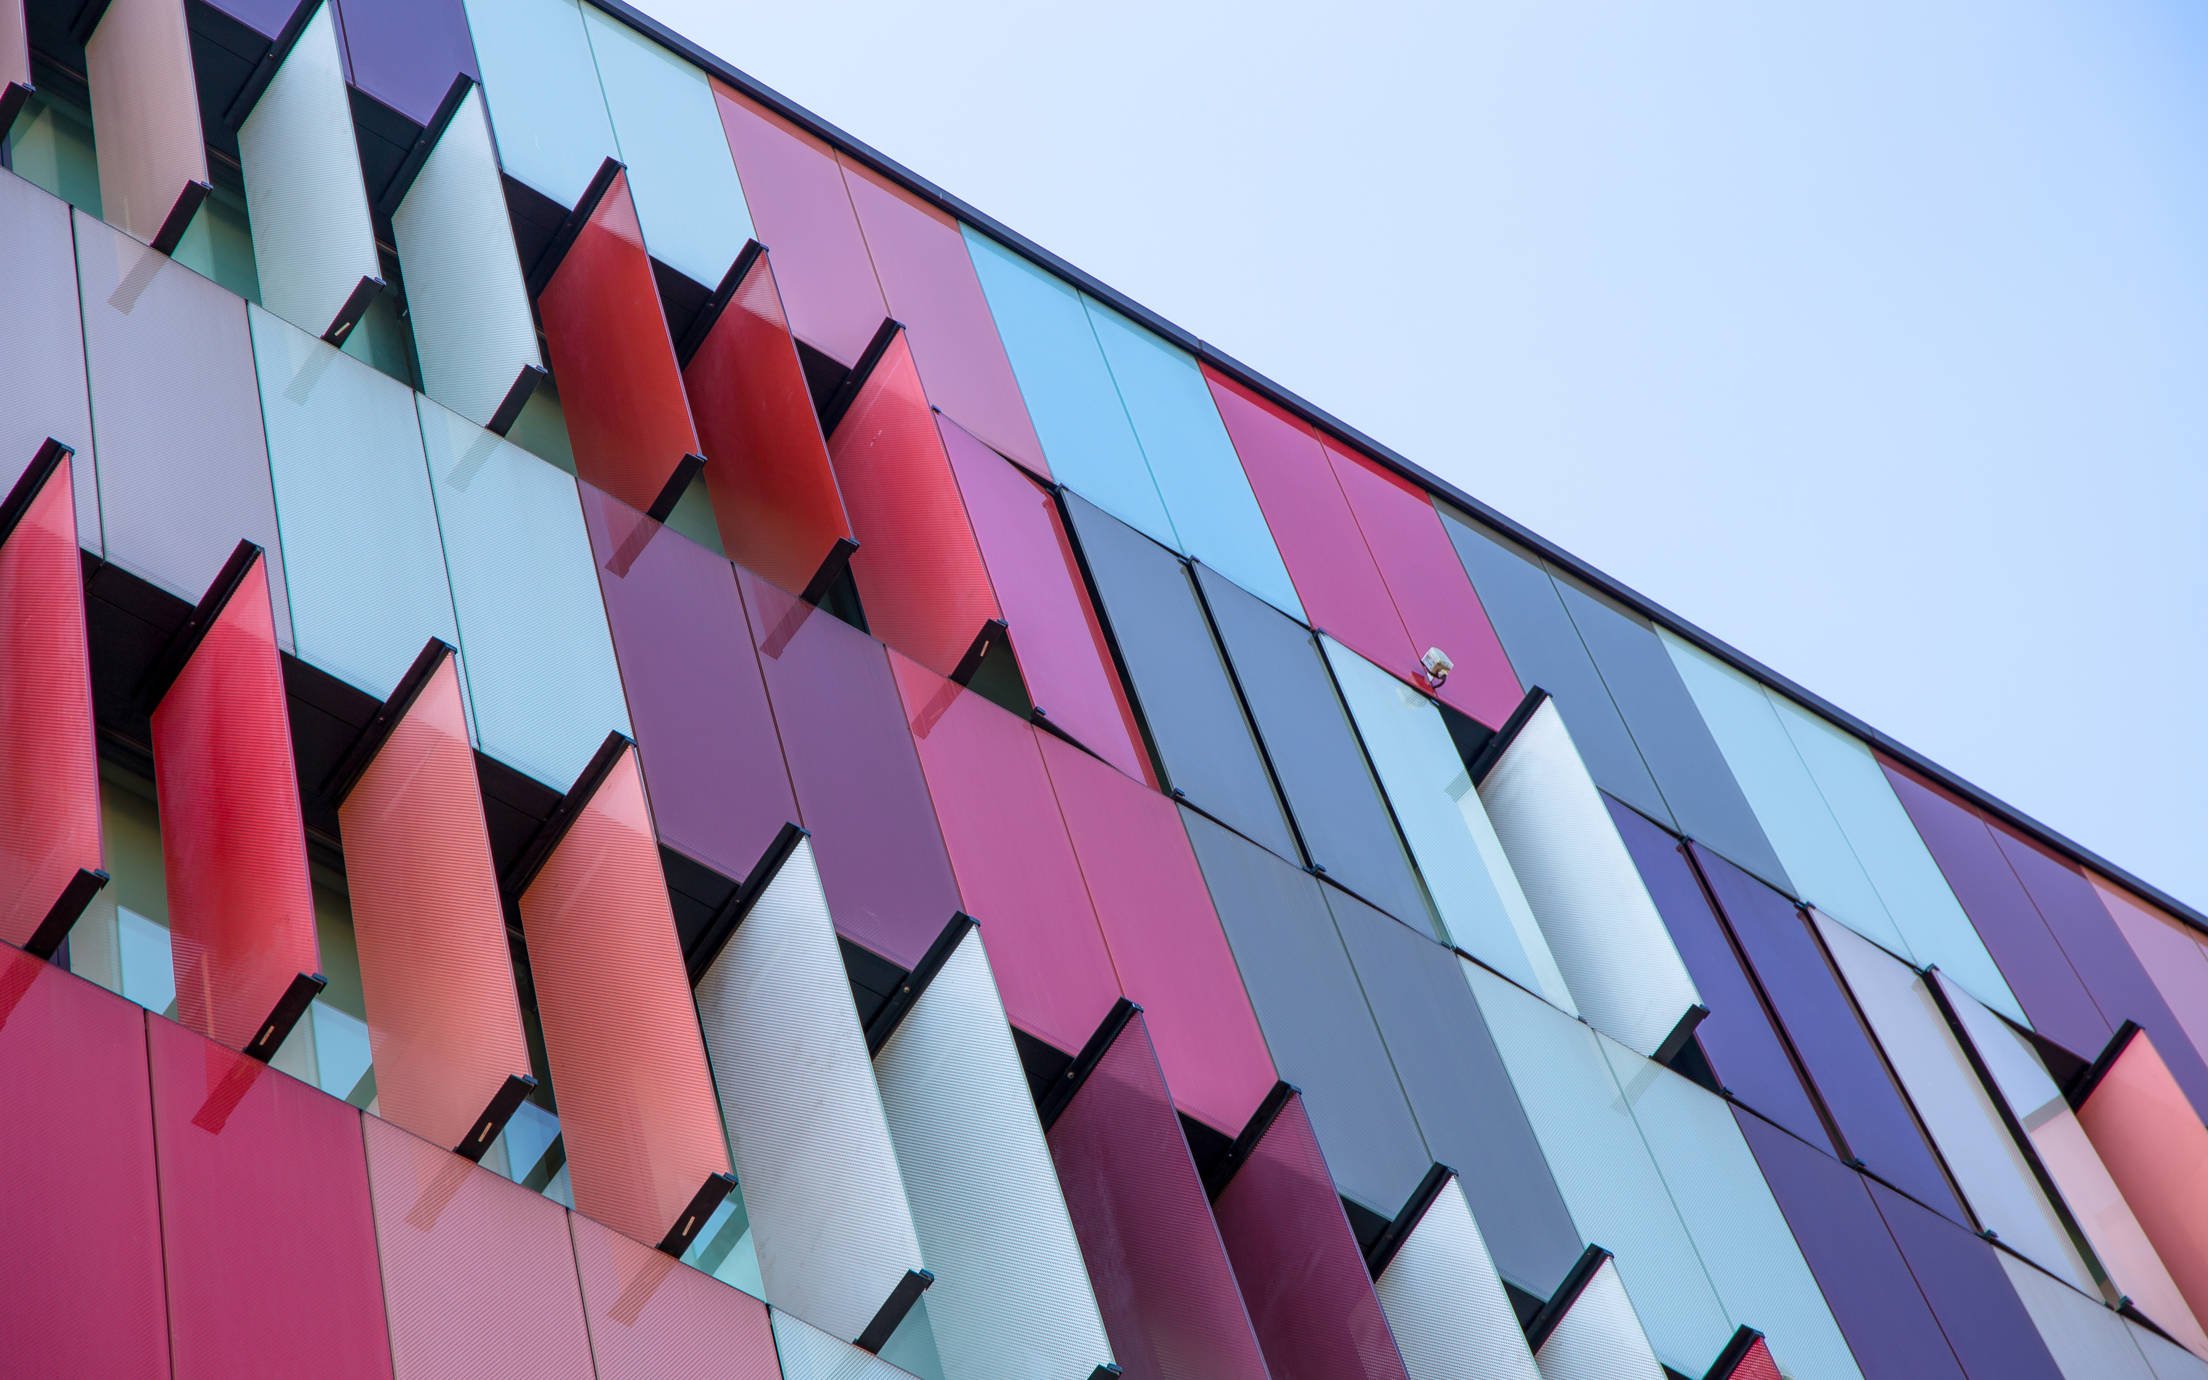 Building covered in red, pink, blue and purple coloured elements